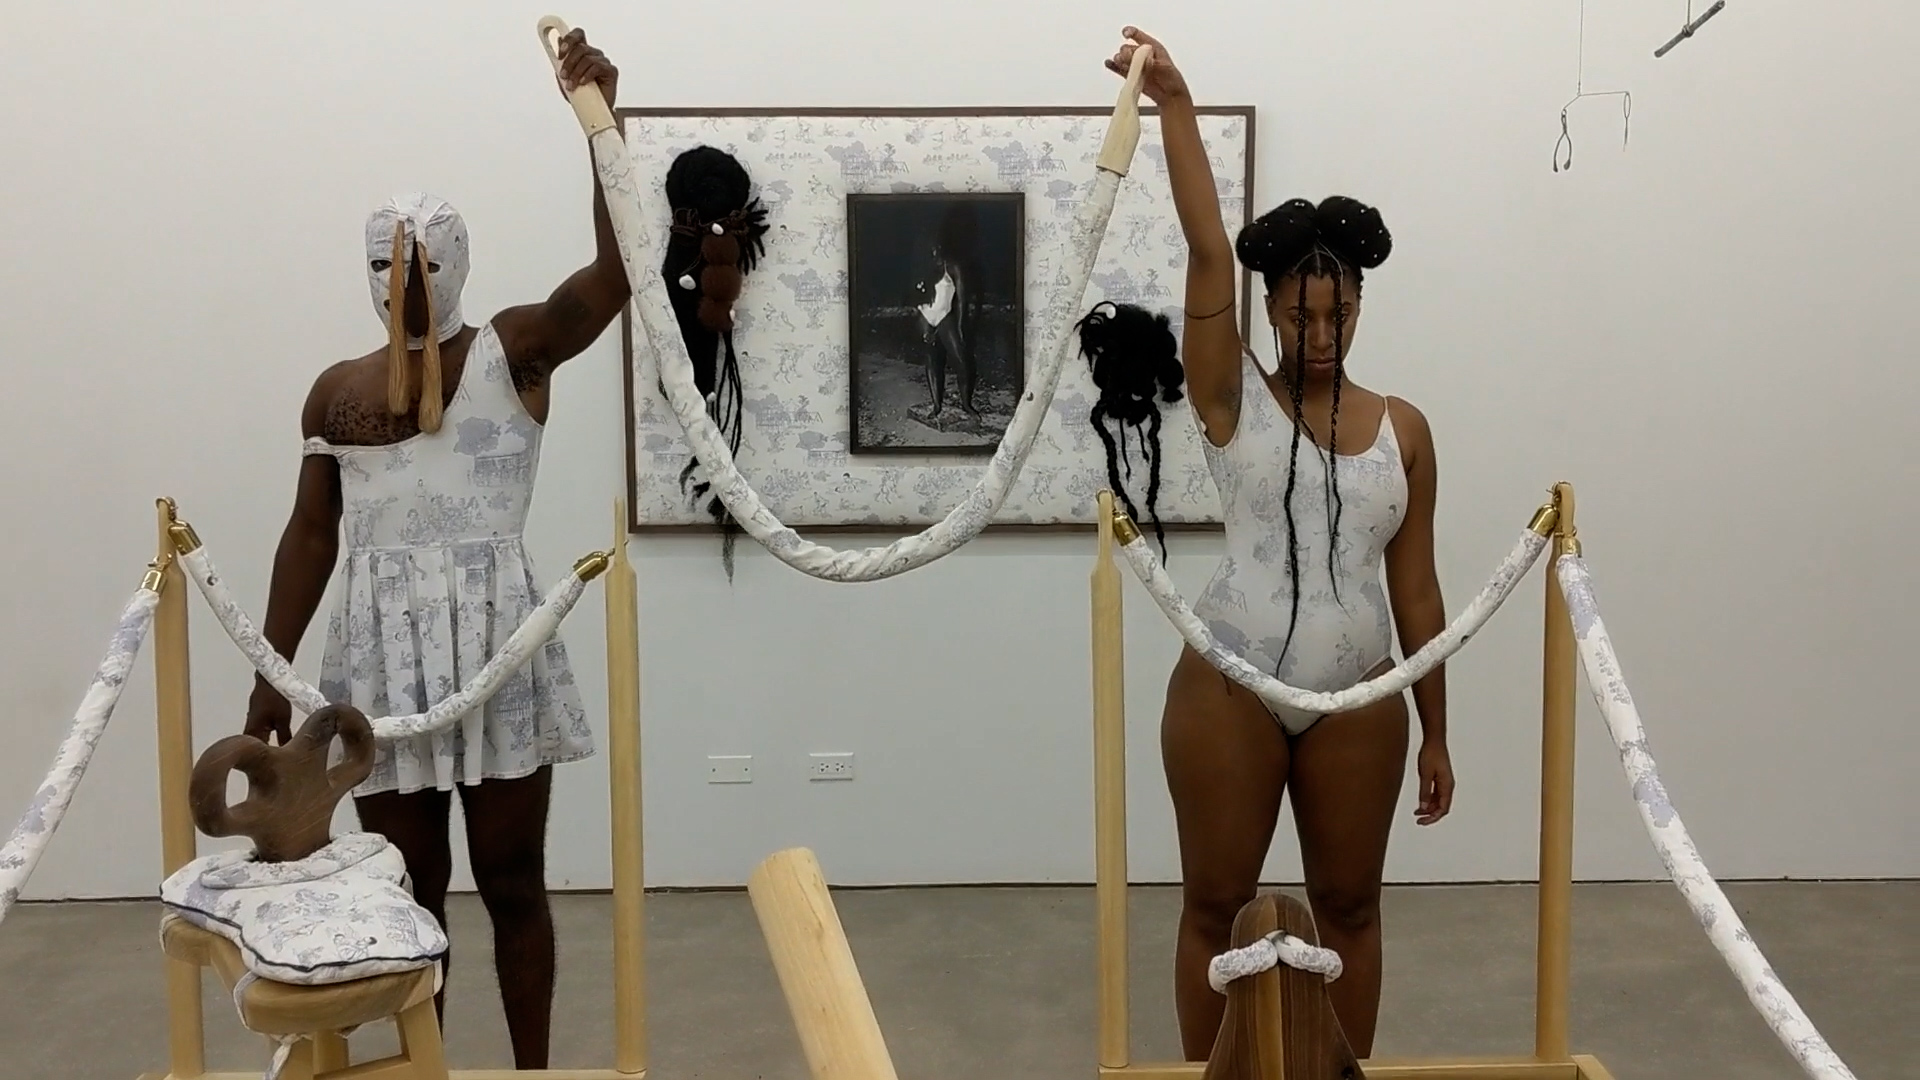 Two figures in an installation/performance holding up a rope